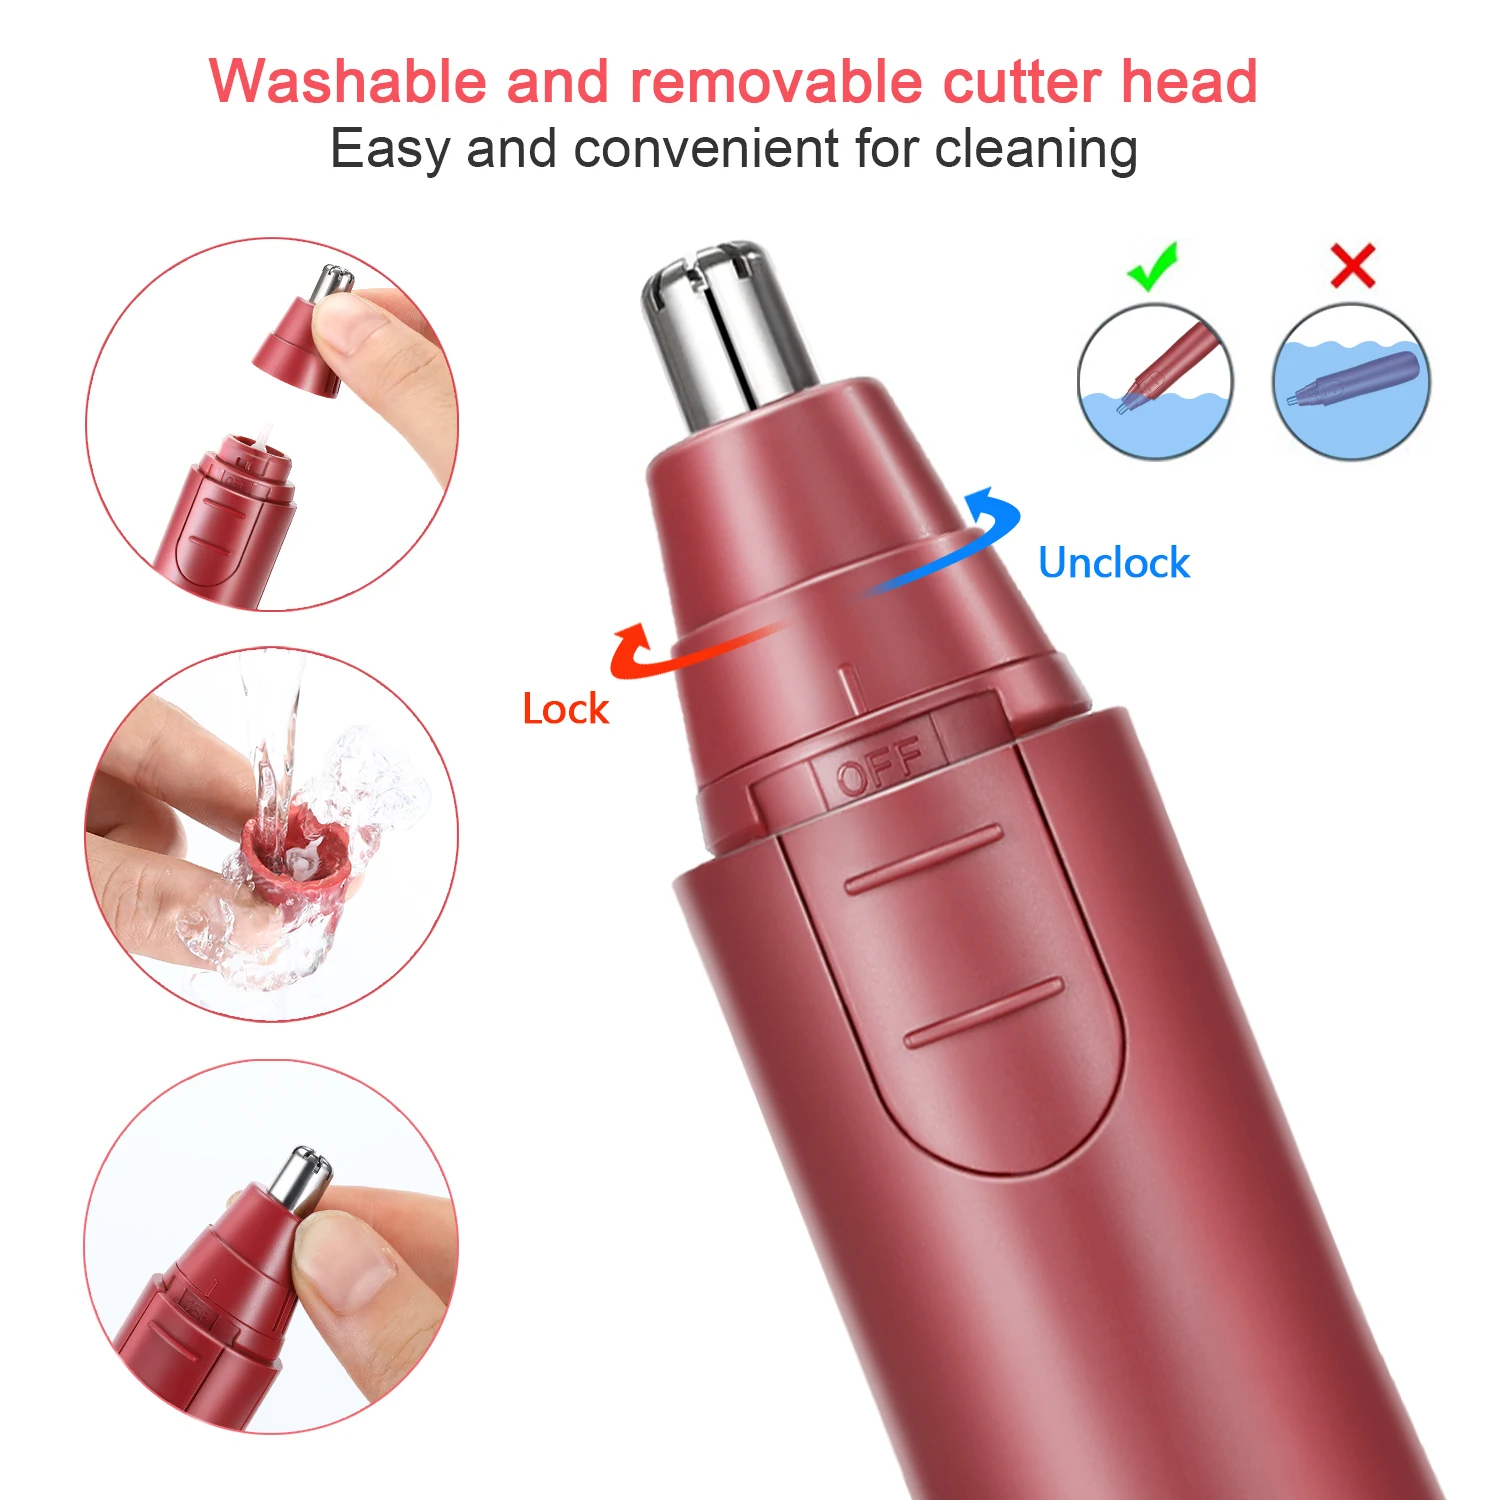 Nose Hair Trimmer, Painless Ear Facial Hair Removal Clipper for Men Women, Battery-Operated, Easy Clean enlarge